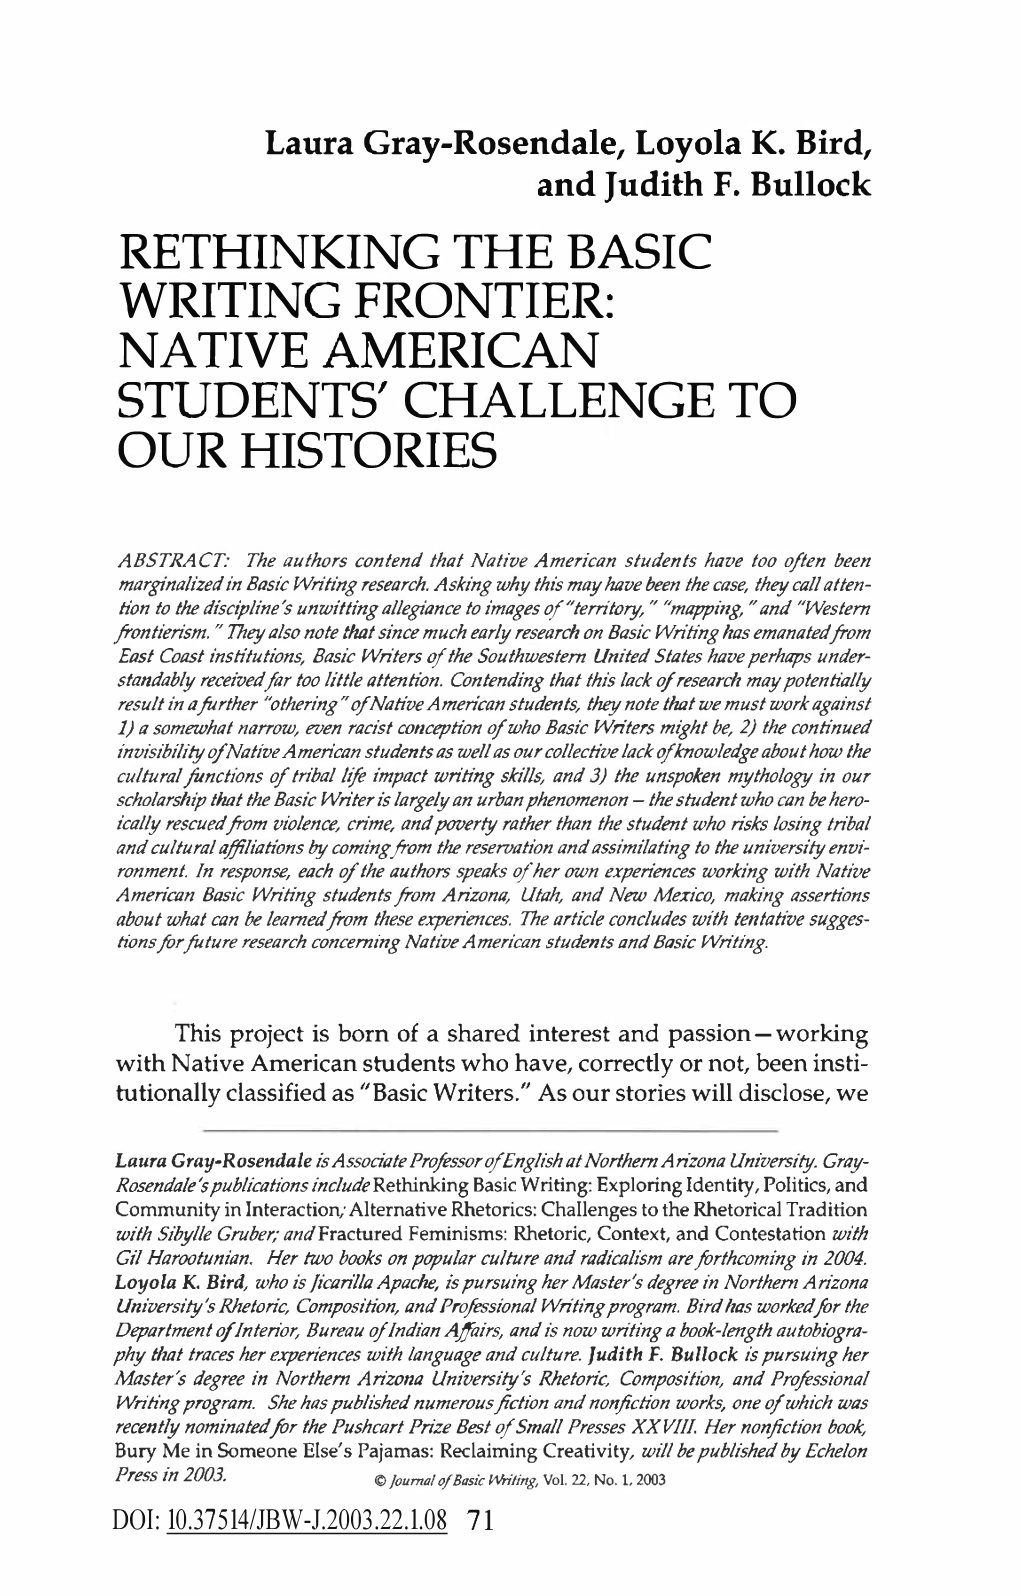 Native American Students' Challenge to Our Histories